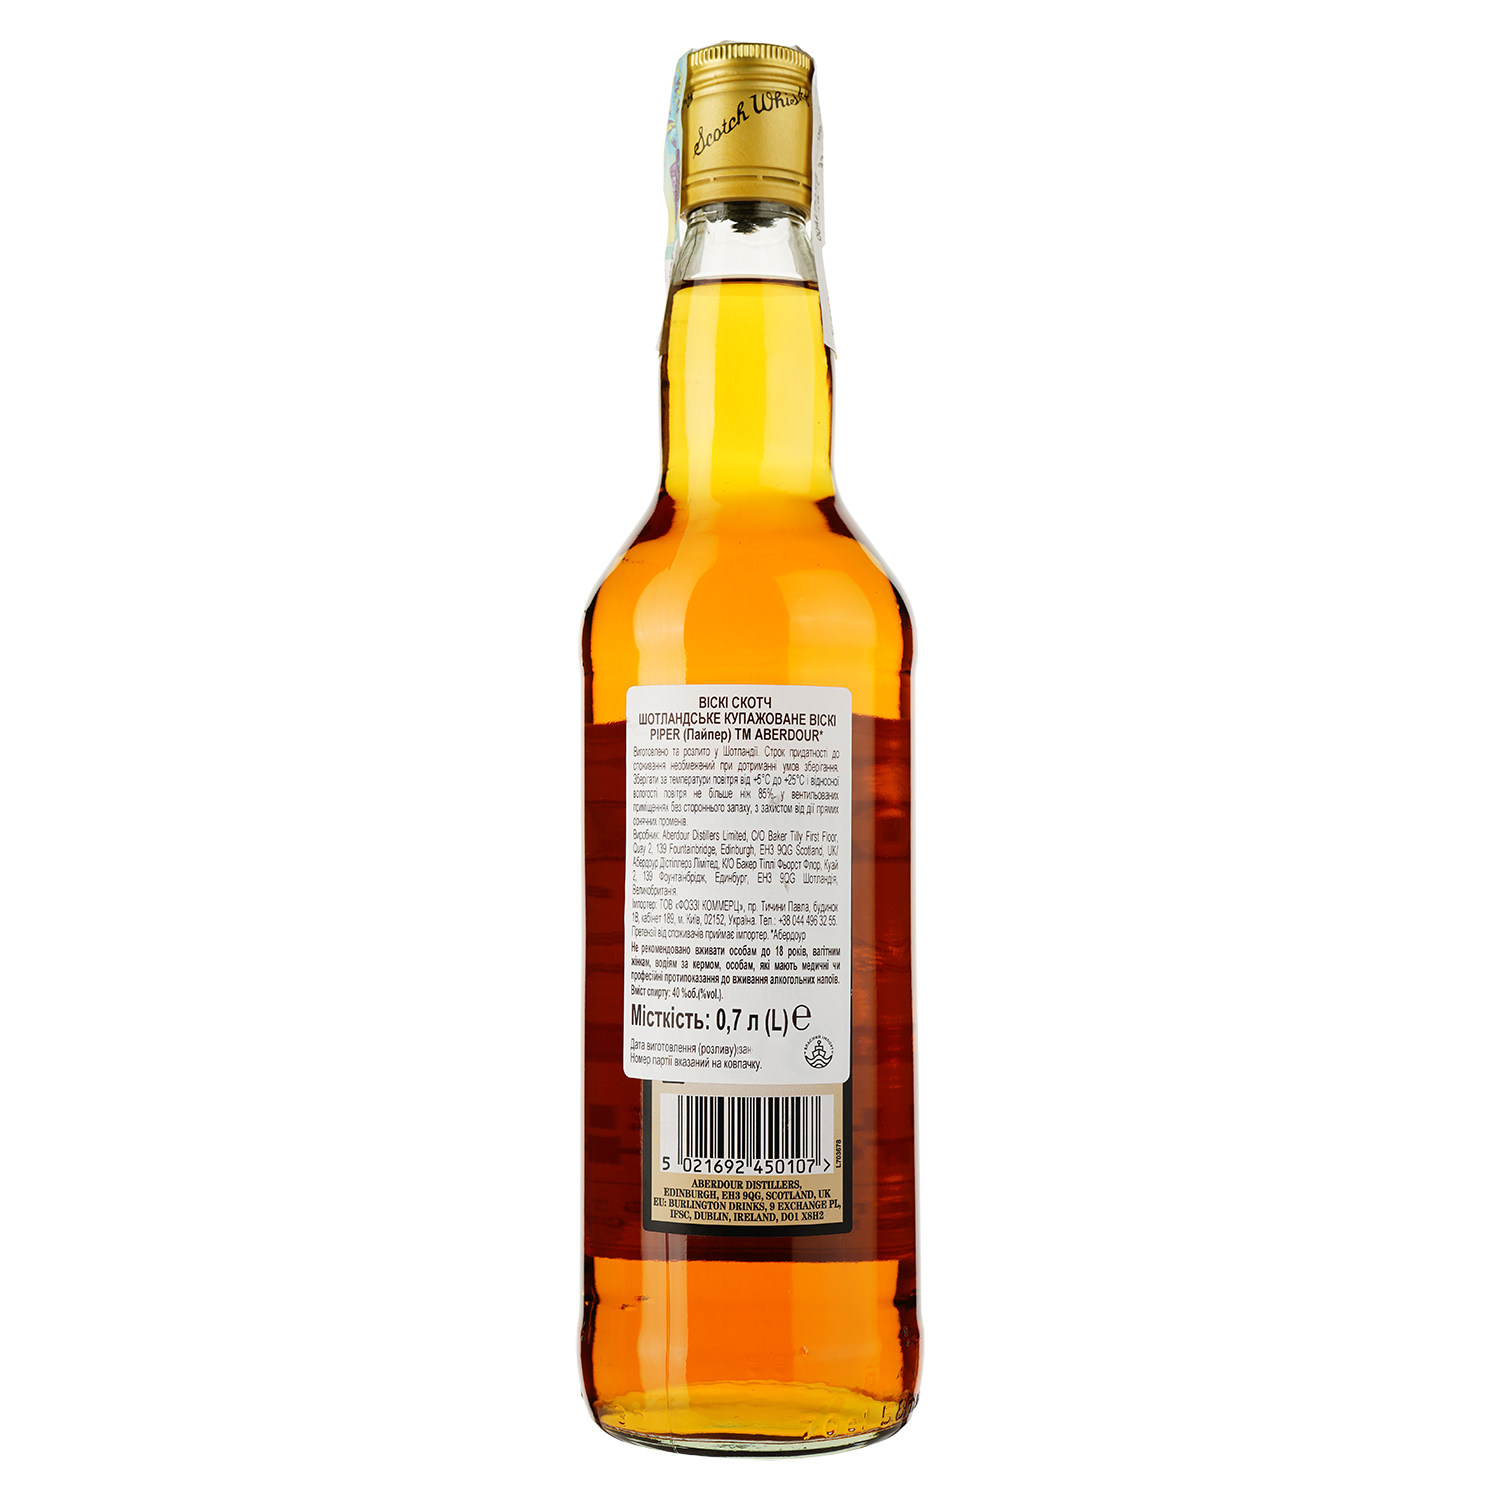 Виски Aberdour Piper Blended Scotch Whisky, 40%, 0,7 л - фото 2